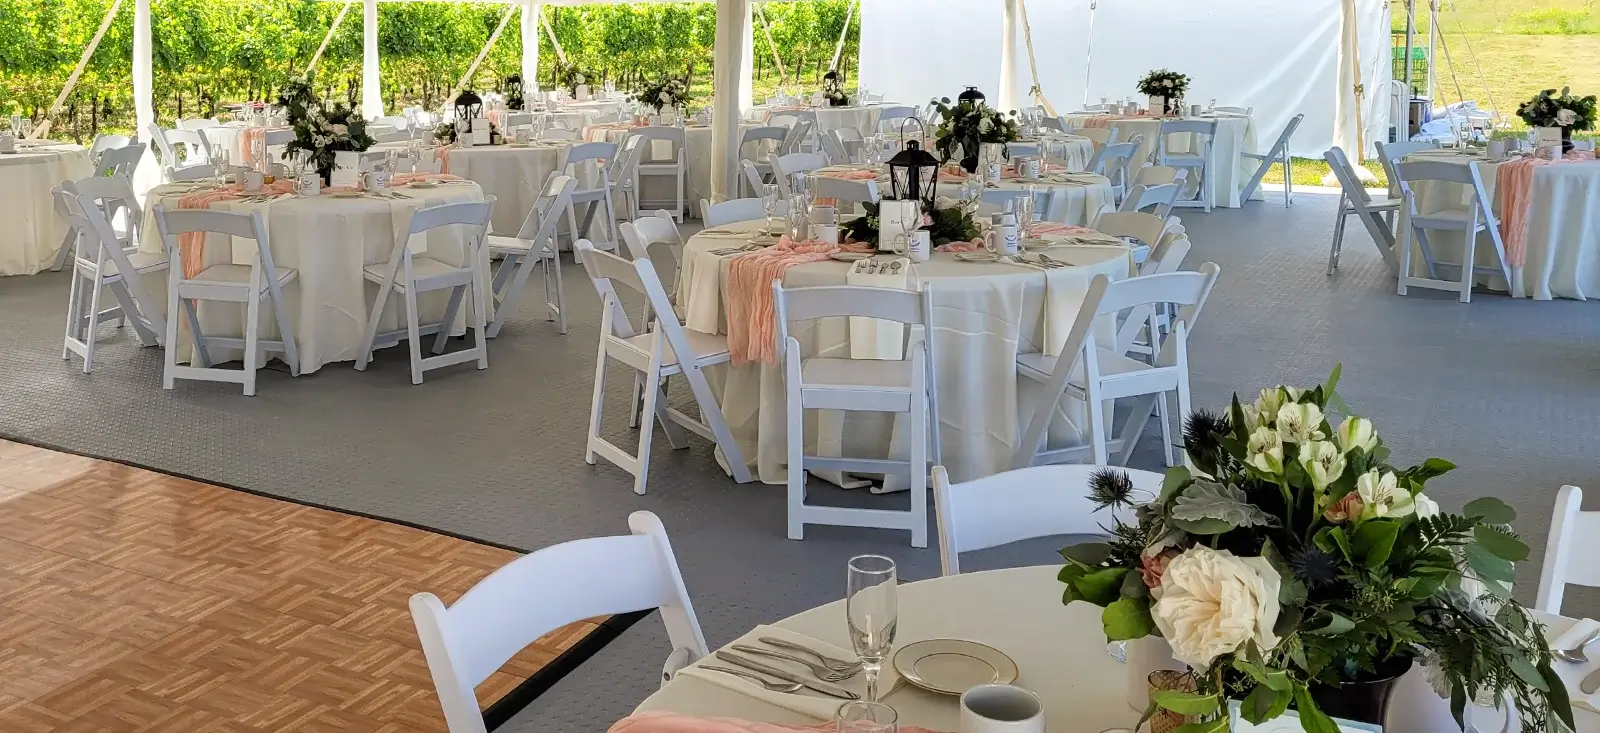 A tent event with FastDeck event flooring and a dance floor